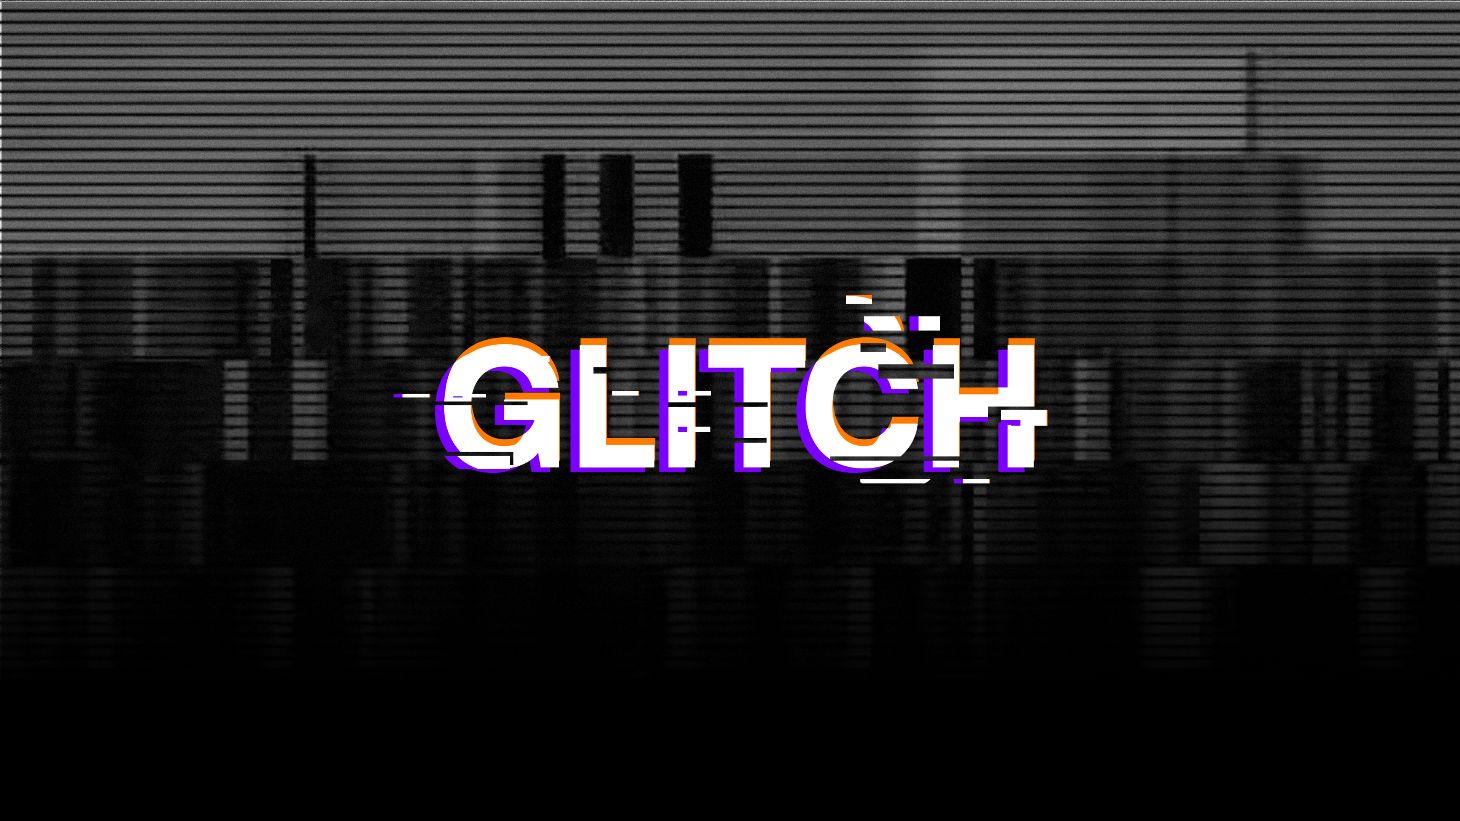 Learn how to add glitch effects to your photos